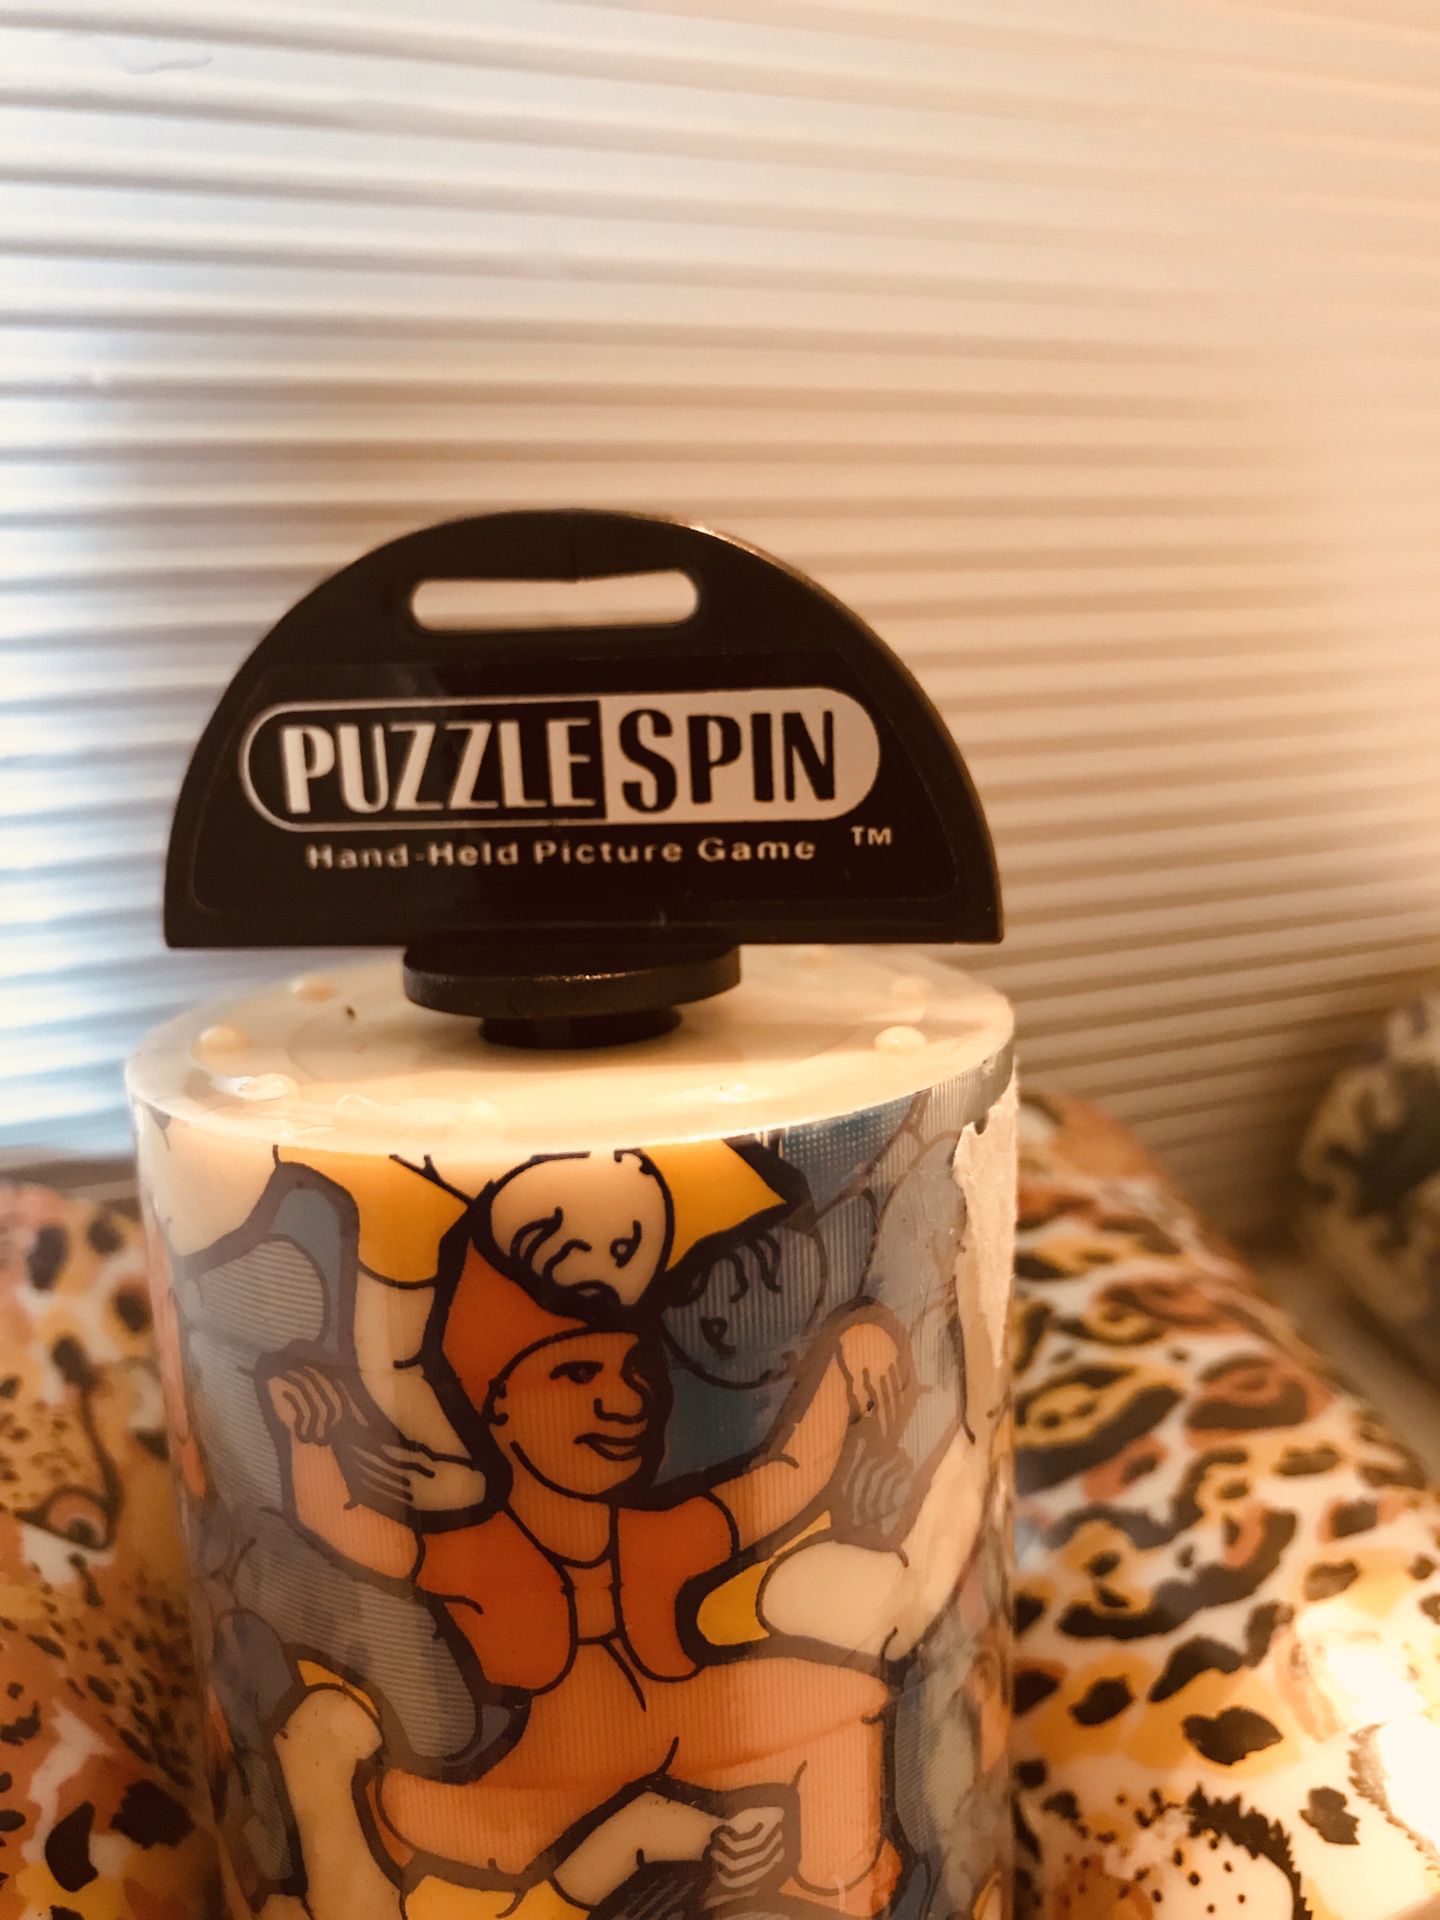 Vintage Puzzle Spin Hand-held picture game (4) Available (2) are the same, it may be similar to Rubik’s cube ( 1 for $12,) 2 for $20 or (4 for $32